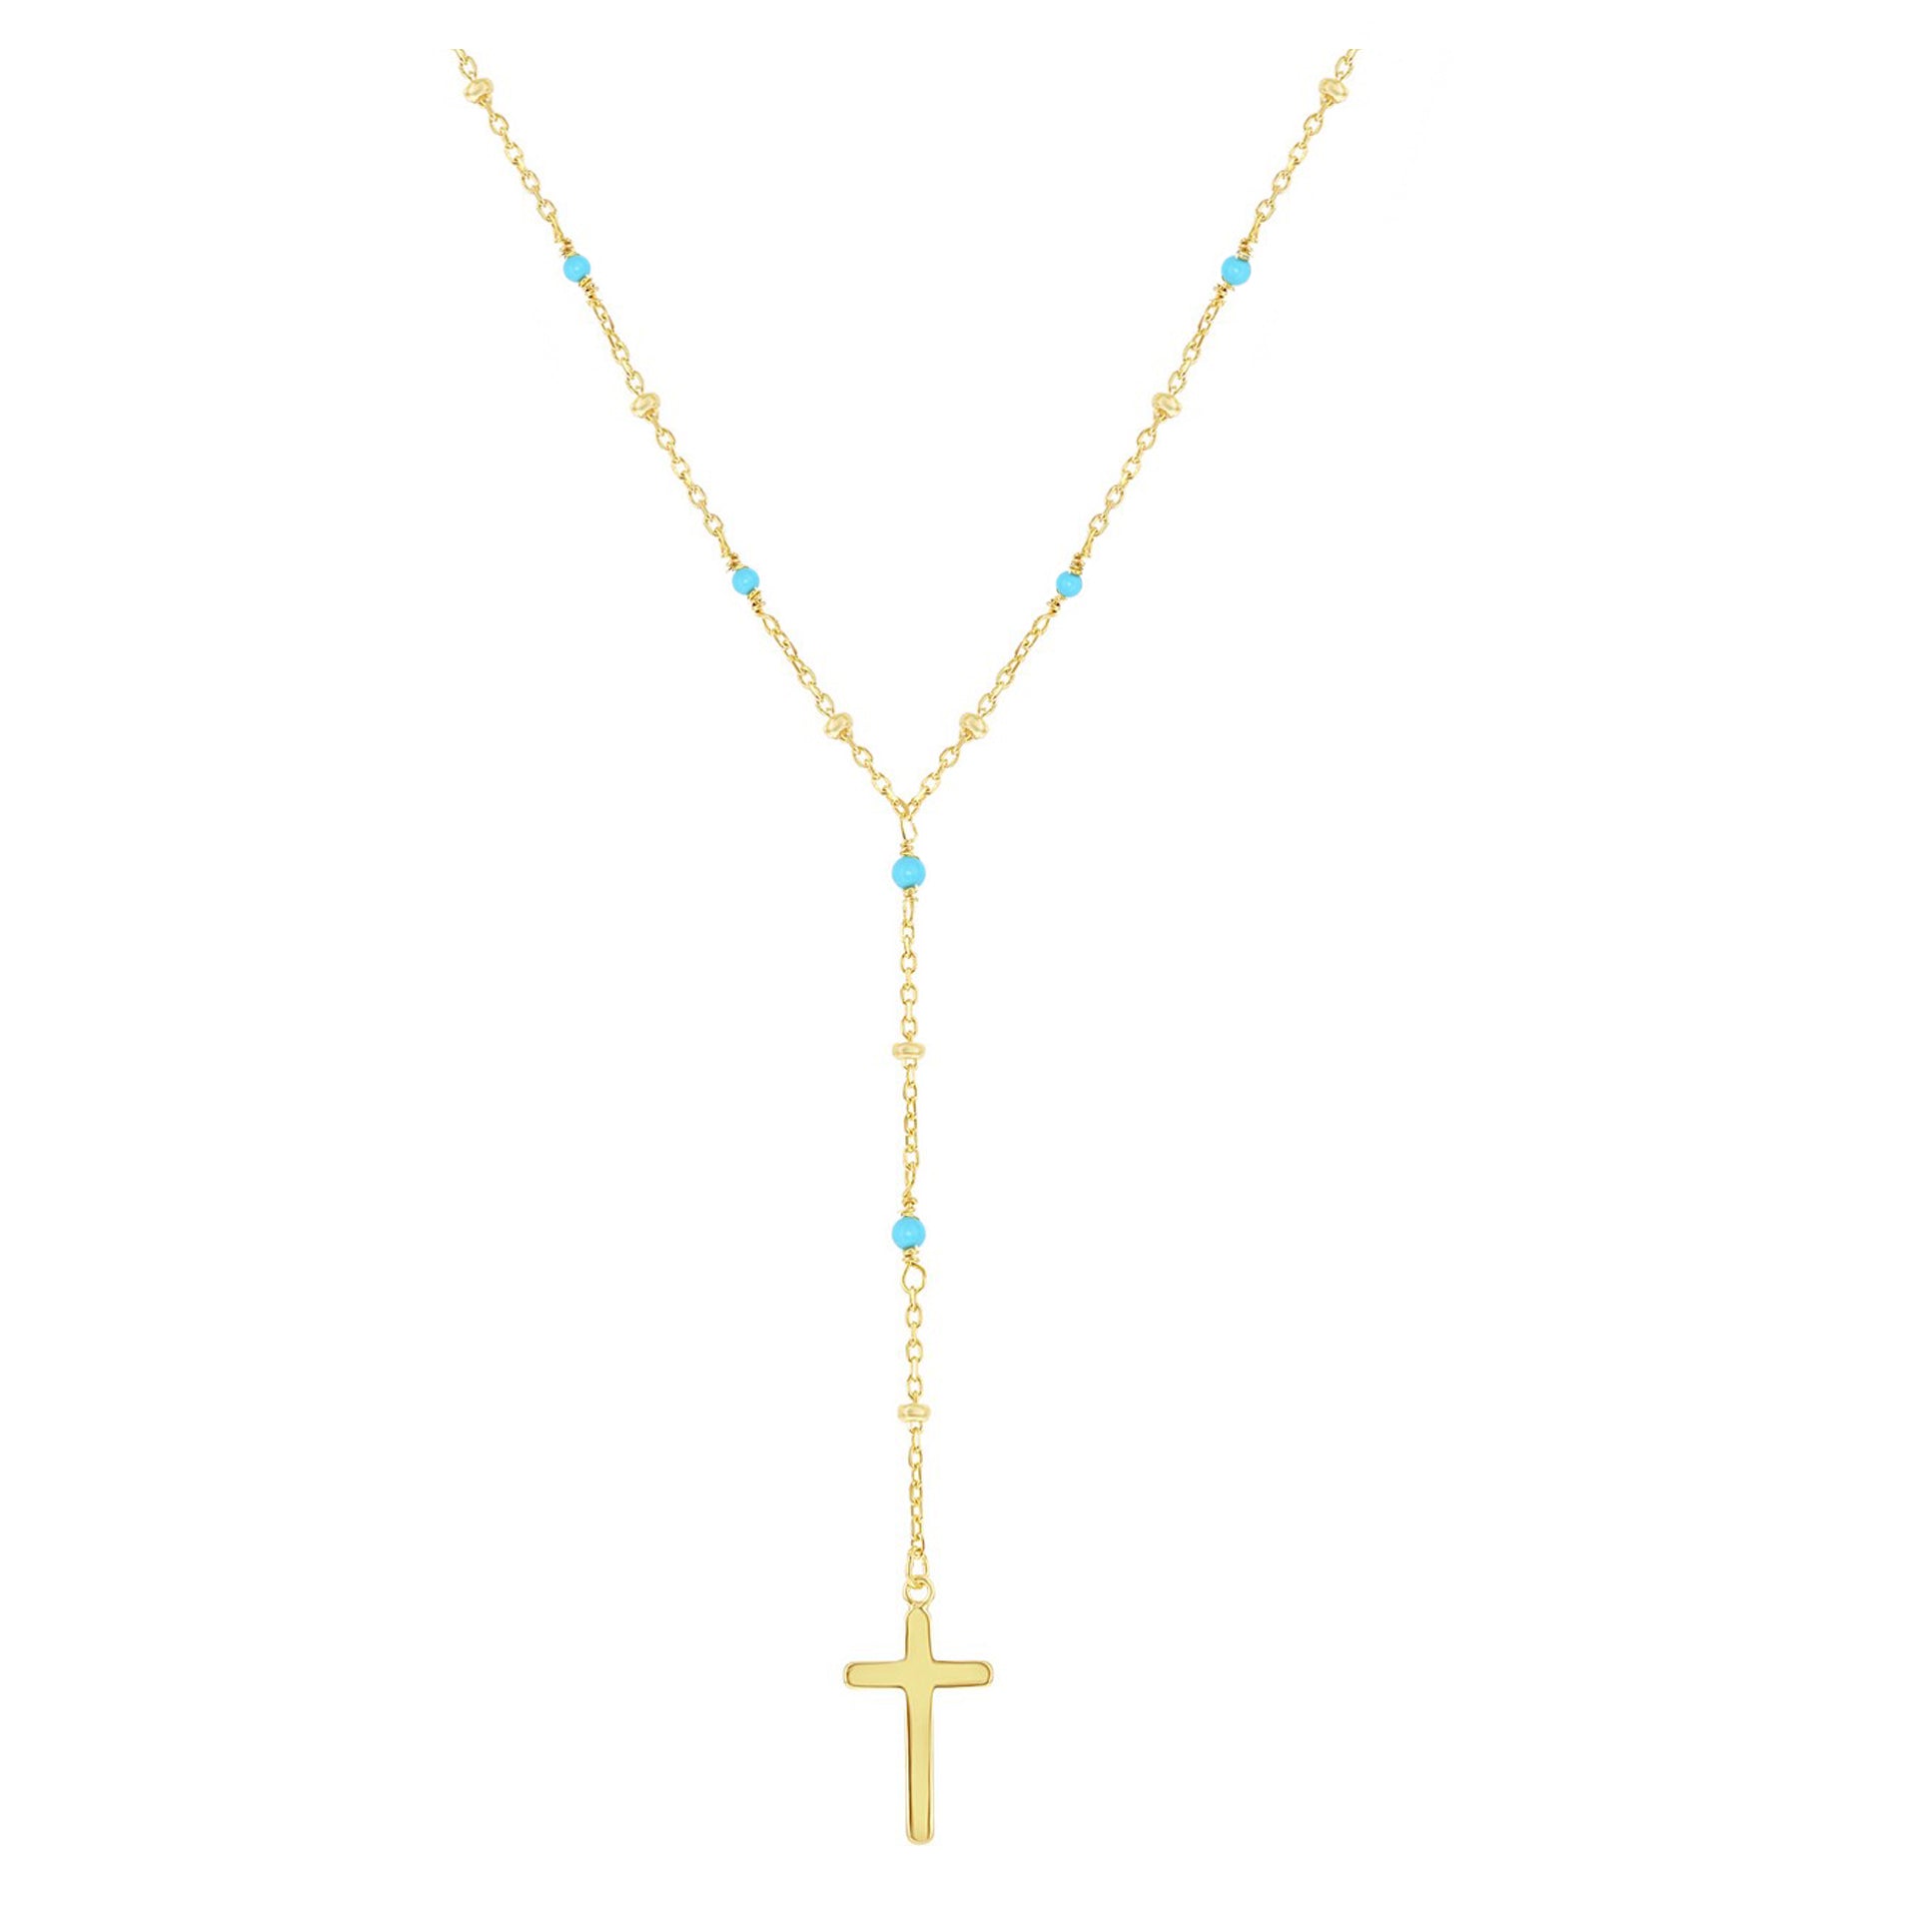 Gold Cross and Turquoise Bead Rosary Necklace